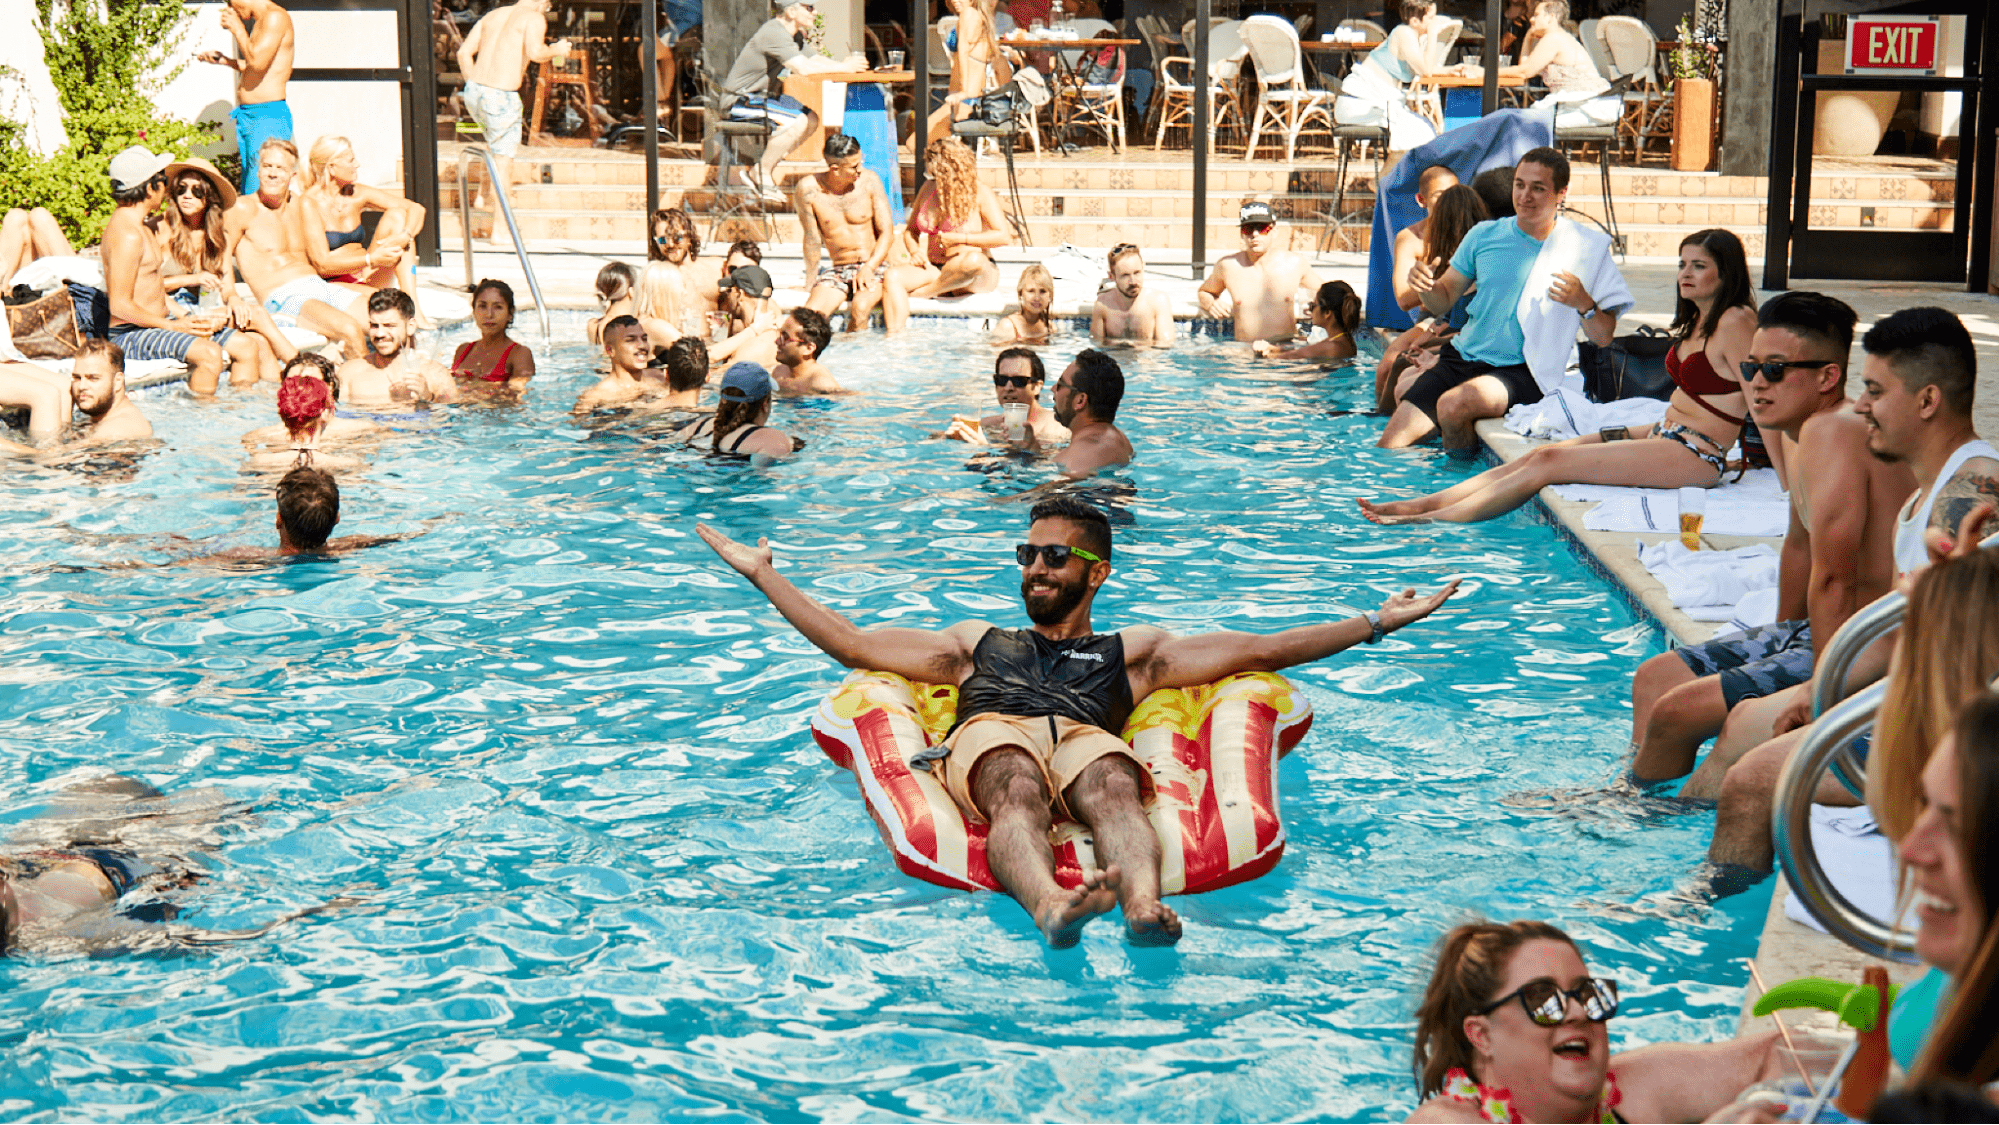 Partygoers hang out in a pool